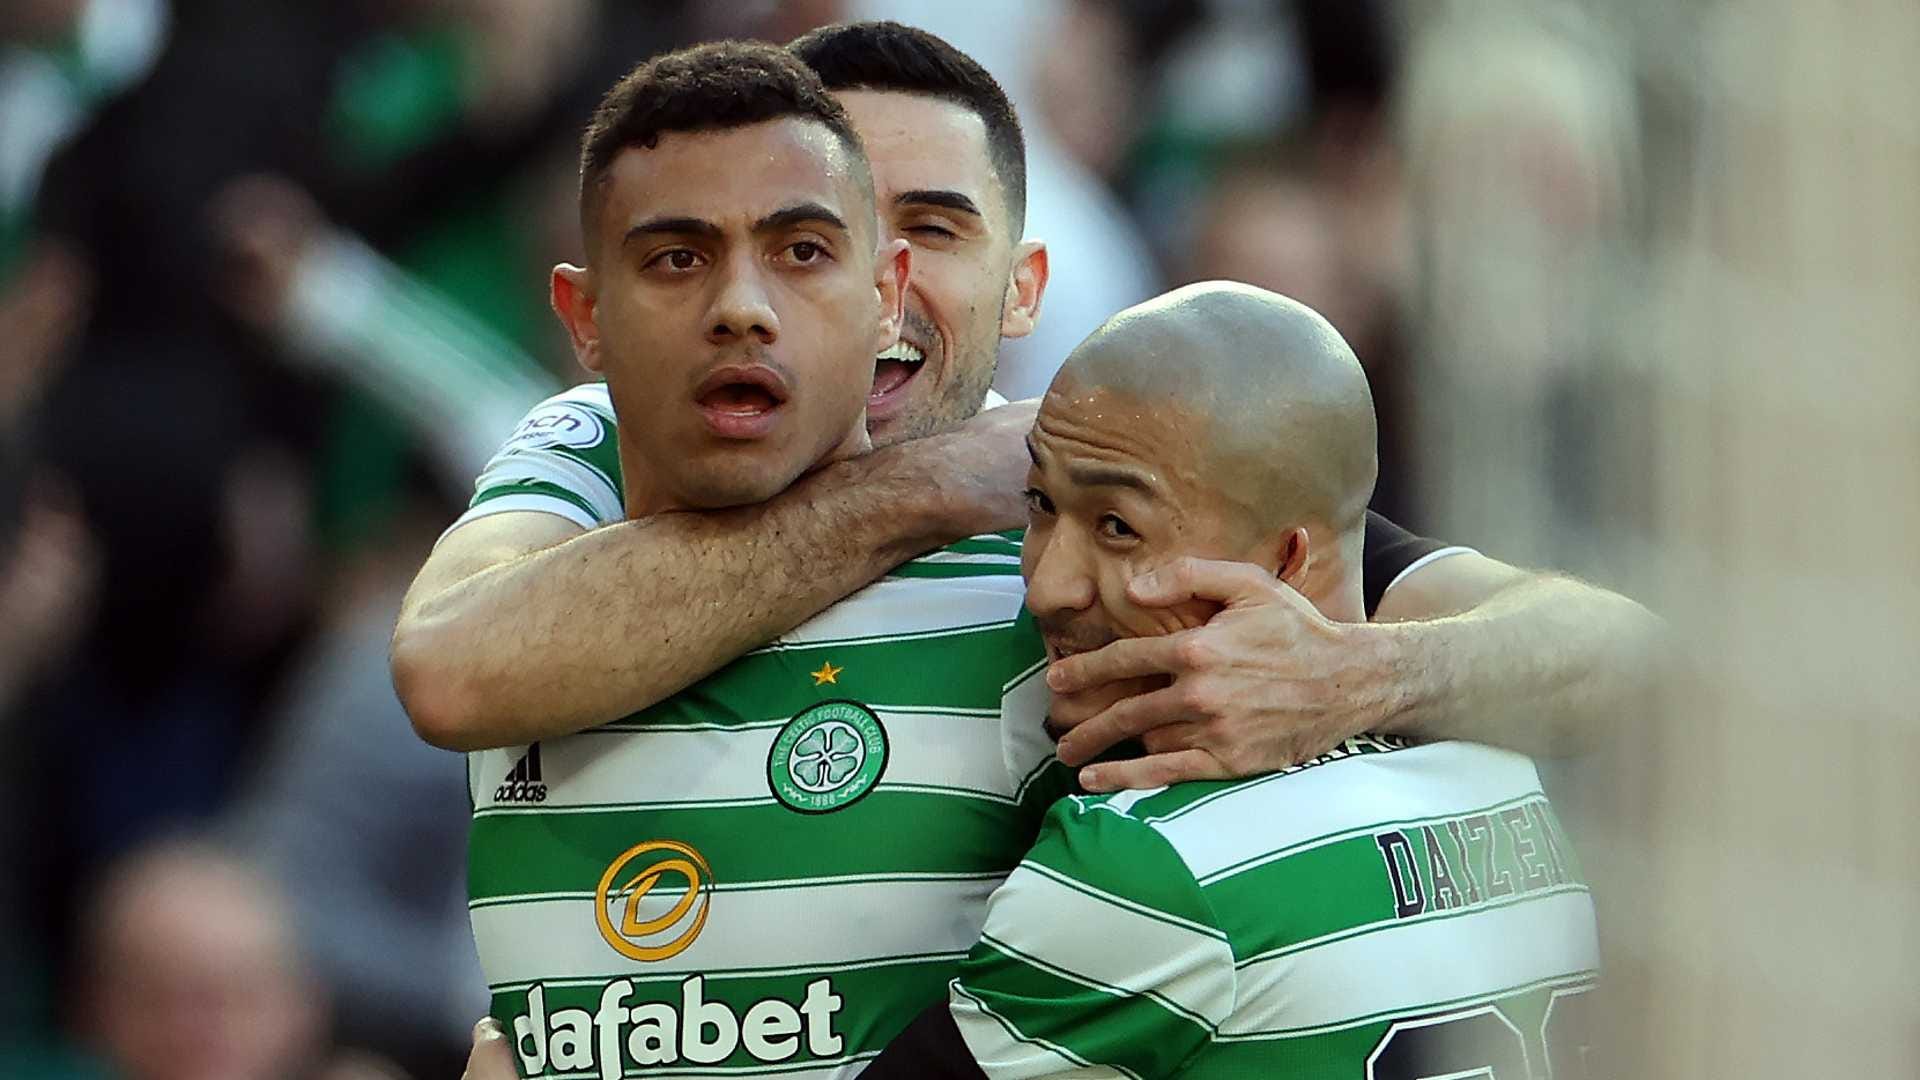 Celtic vs Dundee Utd Live stream, TV channel, kick-off time and where to watch Goal UK